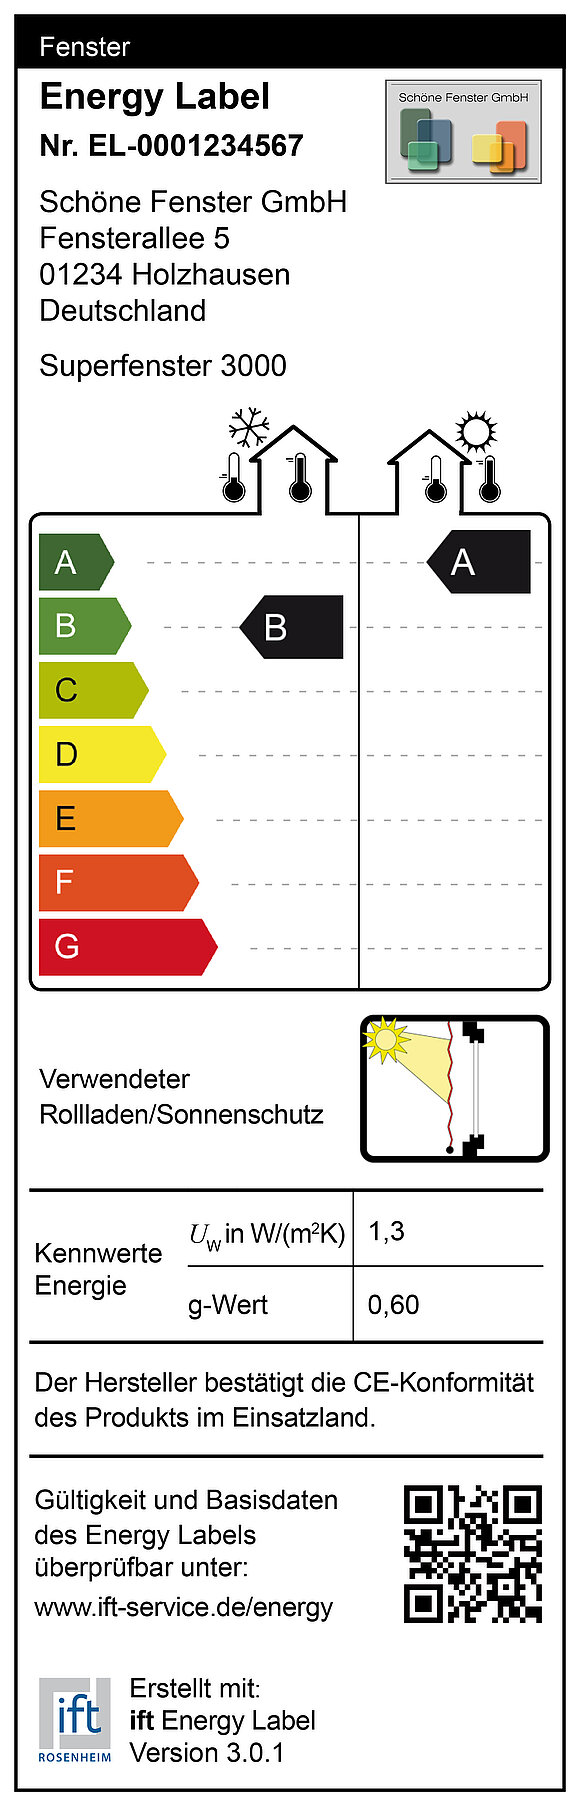 Muster eines Energy Labels